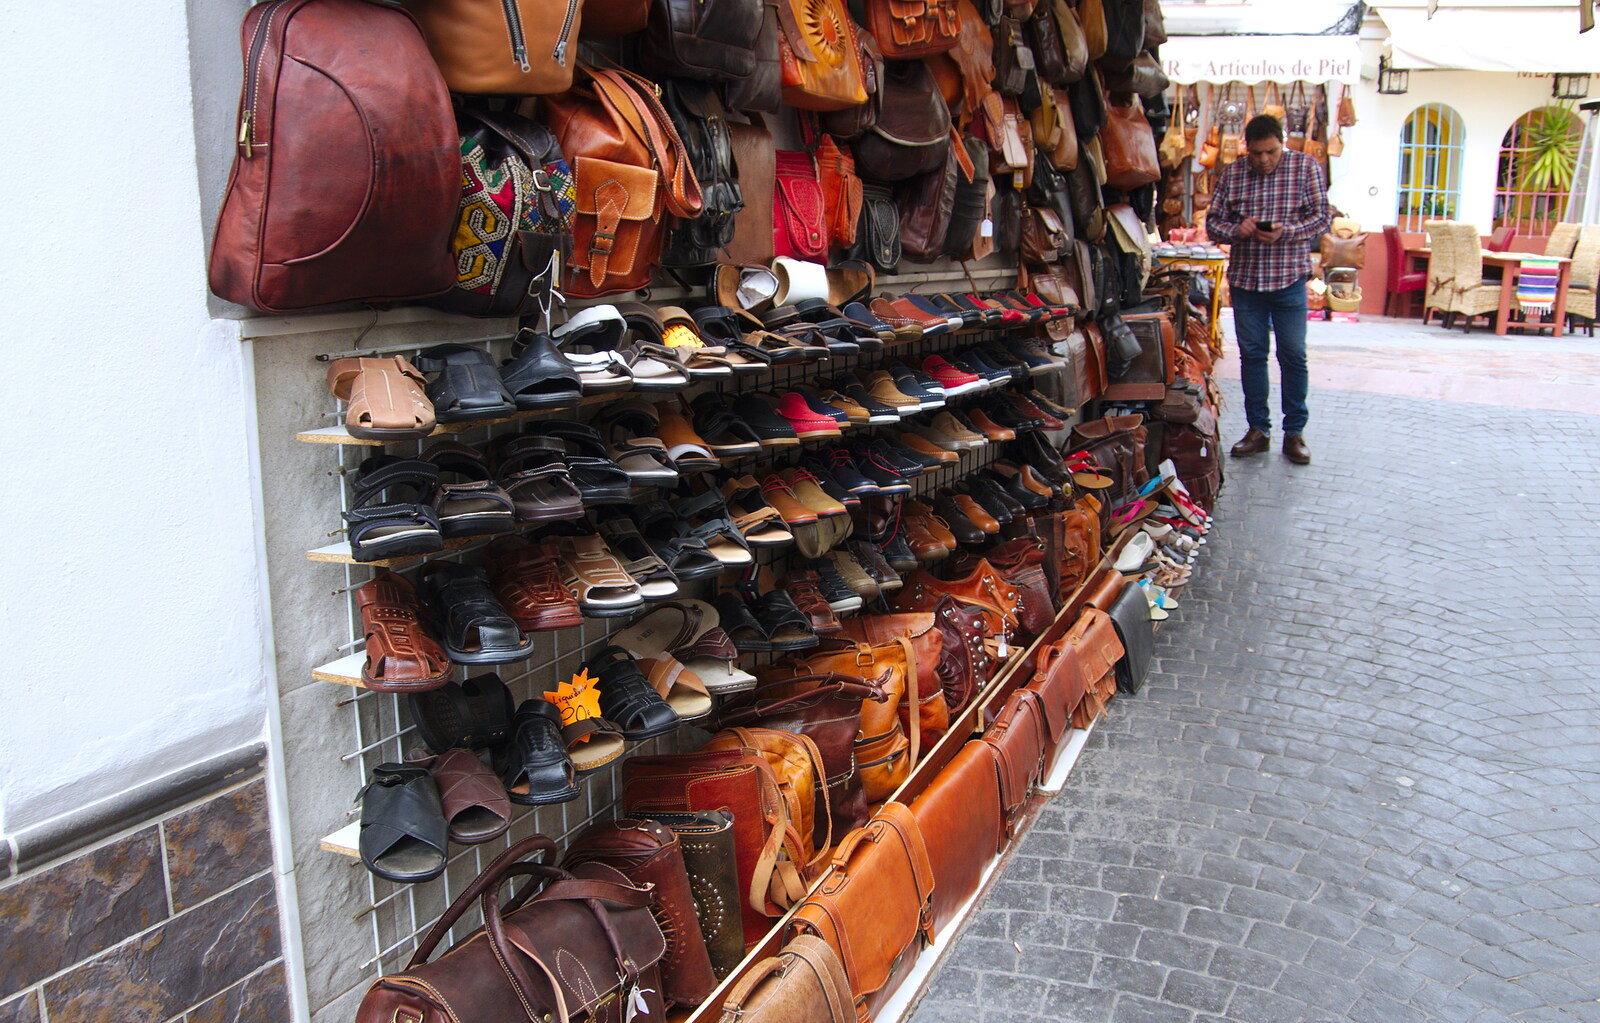 Leather goods in an alleyway from An Easter Parade, Nerja, Andalusia, Spain - 21st April 2019